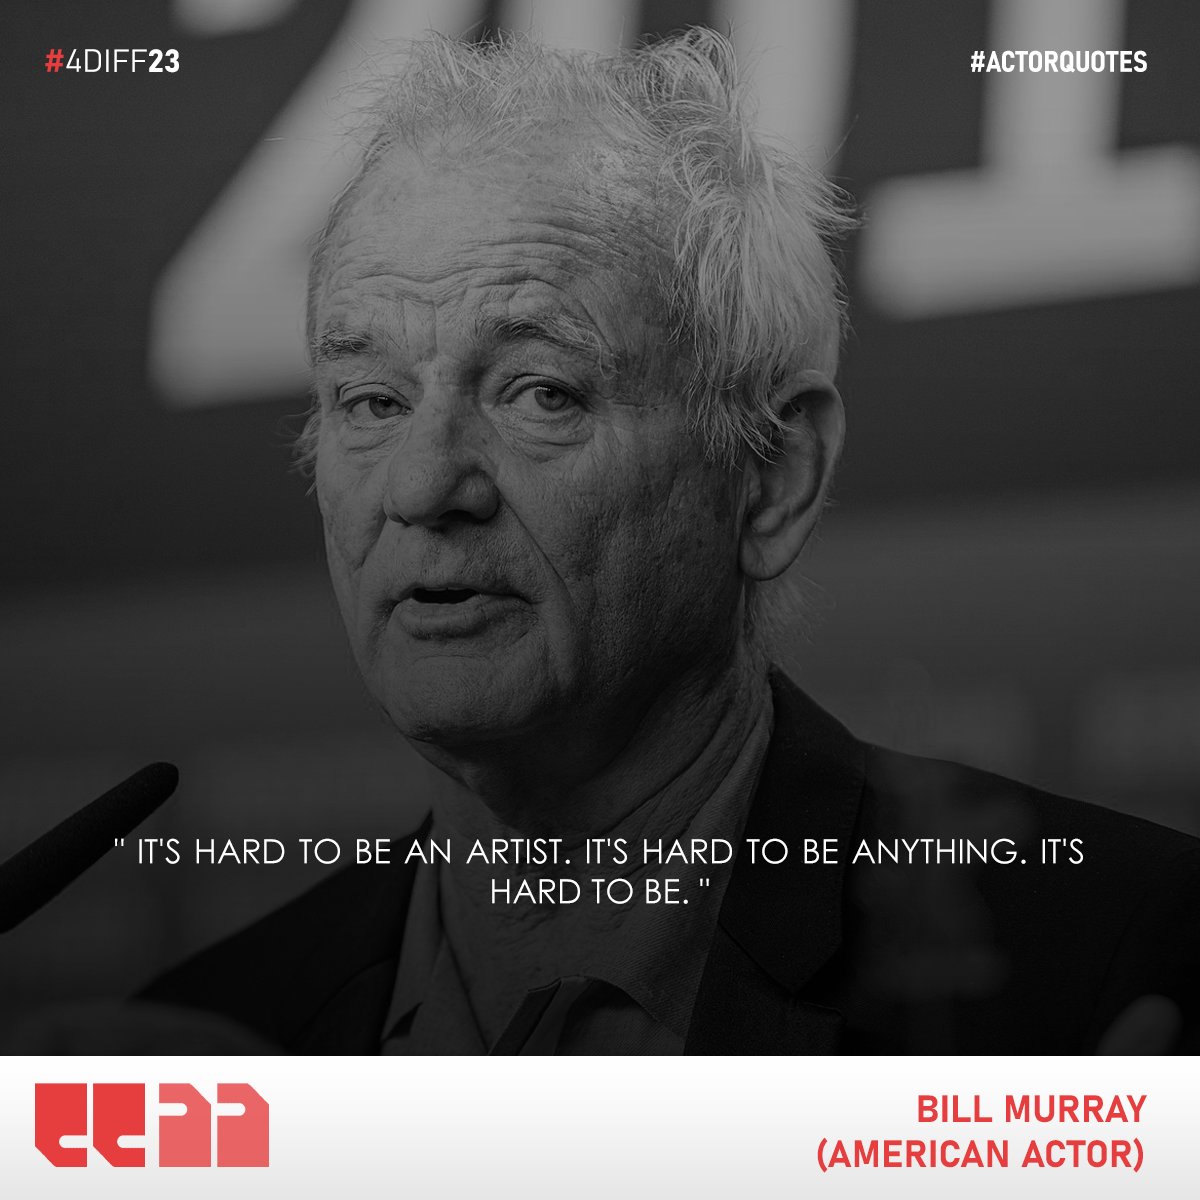 'It's hard to be an artist. It's hard to be anything. It's hard to be.' - Bill Murray

#BillMurray #americanactor #actotquotes #fdiff